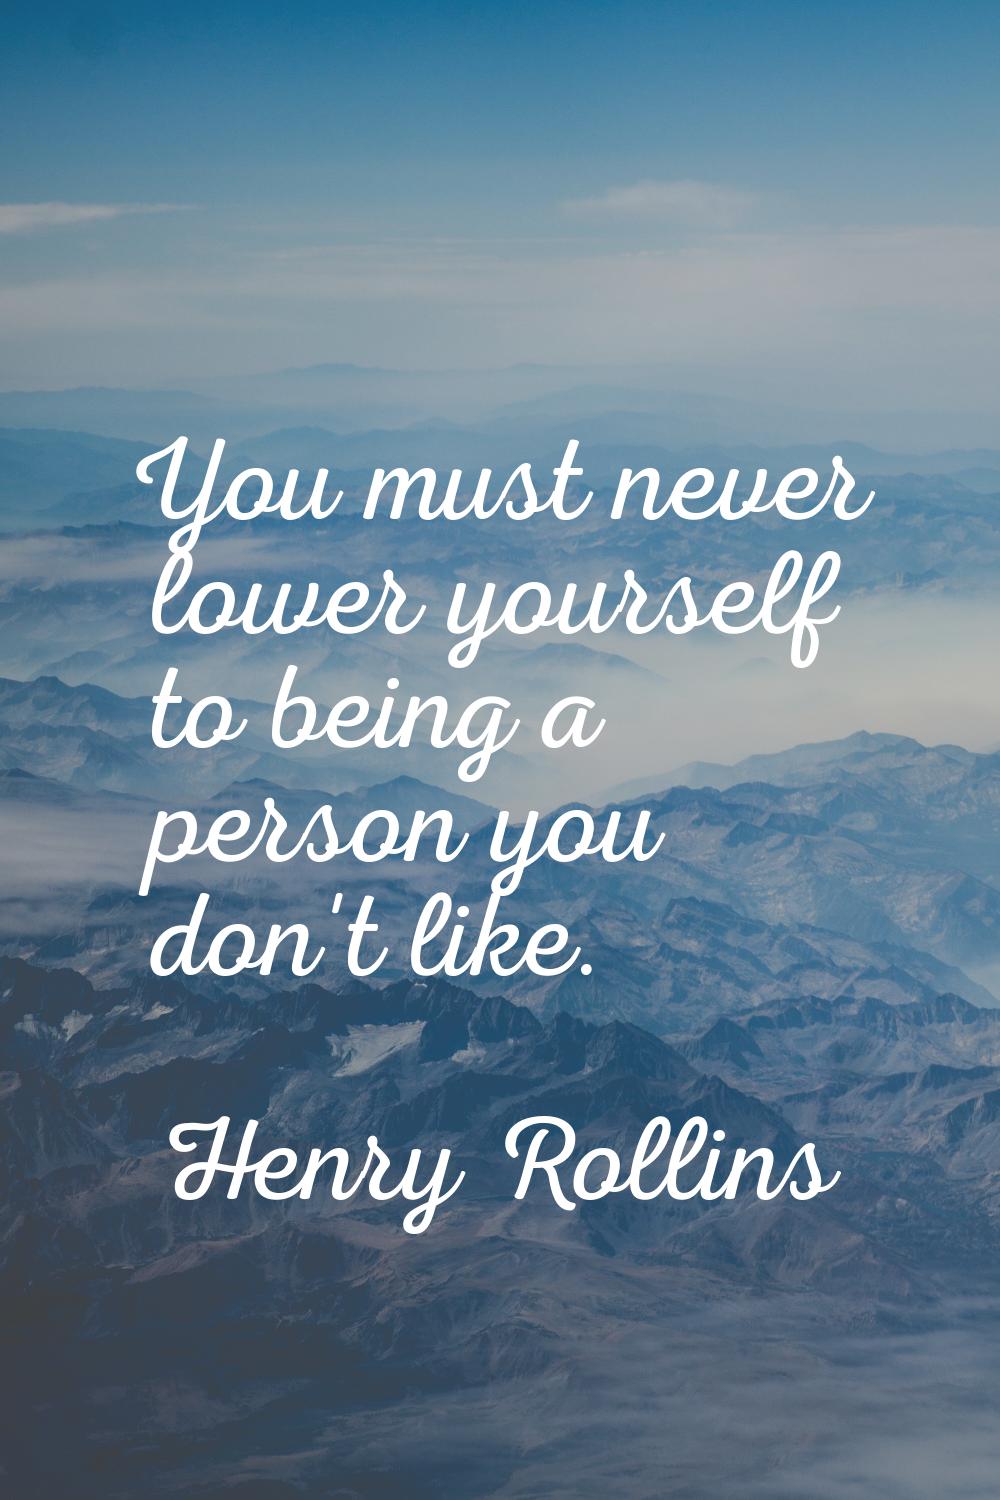 You must never lower yourself to being a person you don't like.